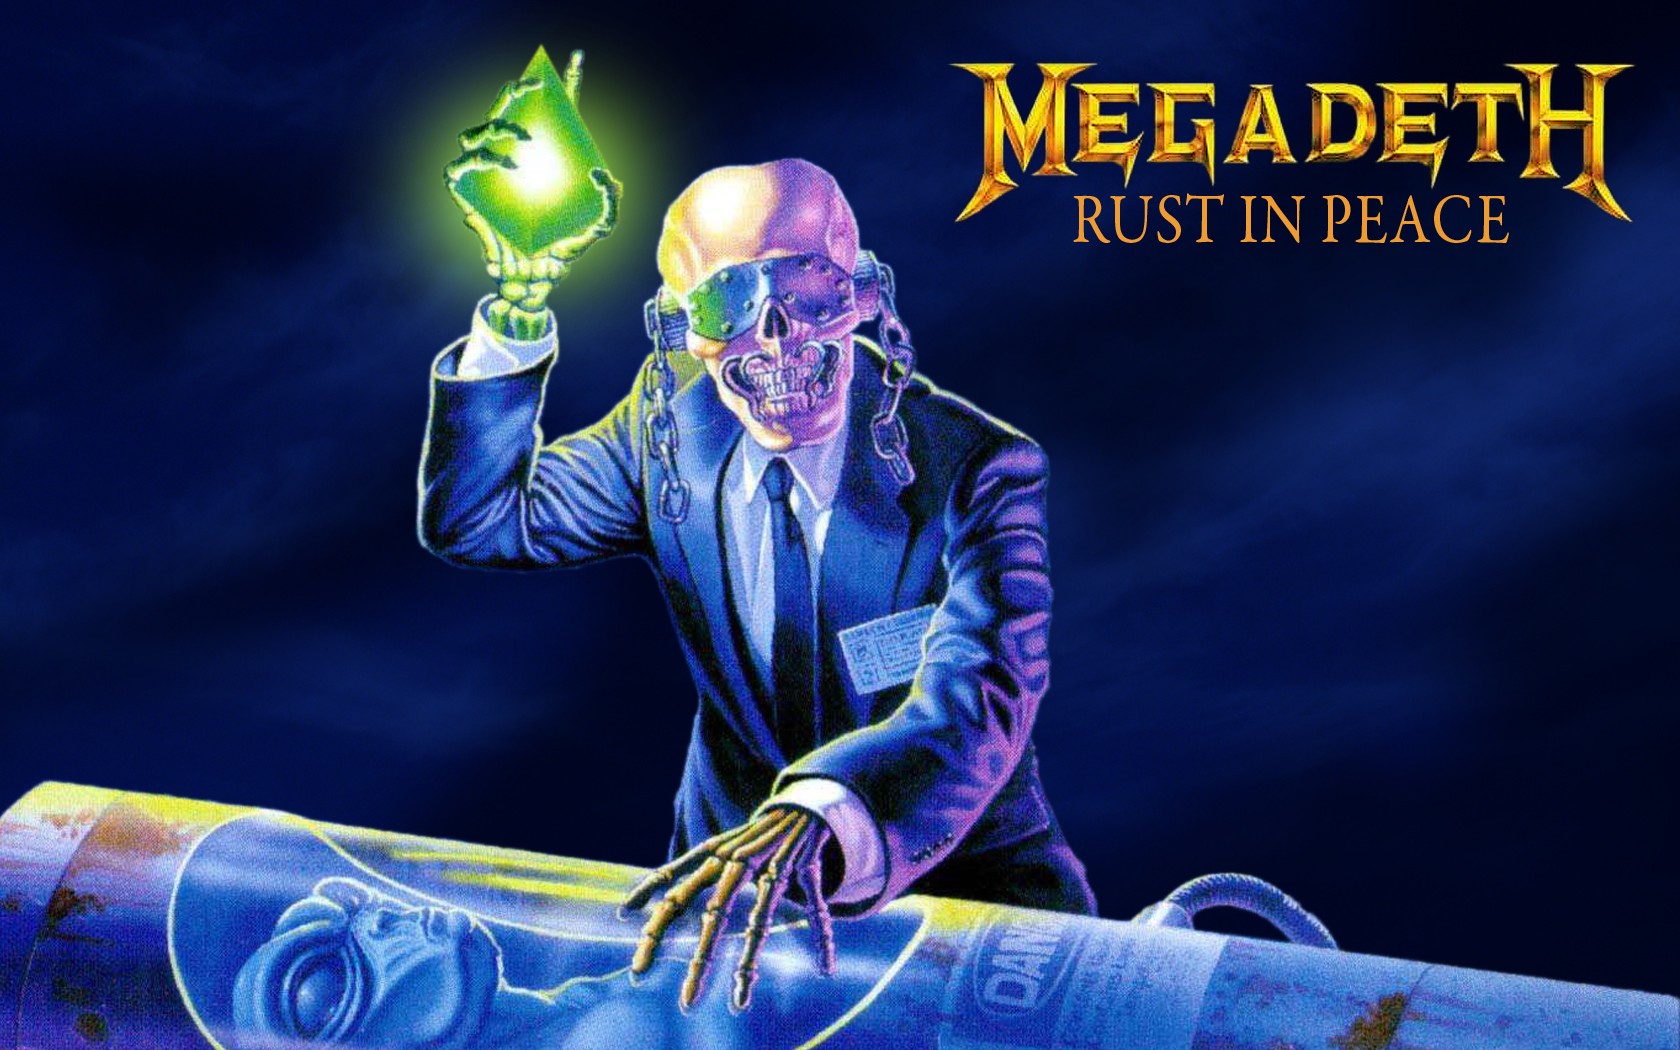 Megadeth Image Rust In Peace Wallpaper HD And